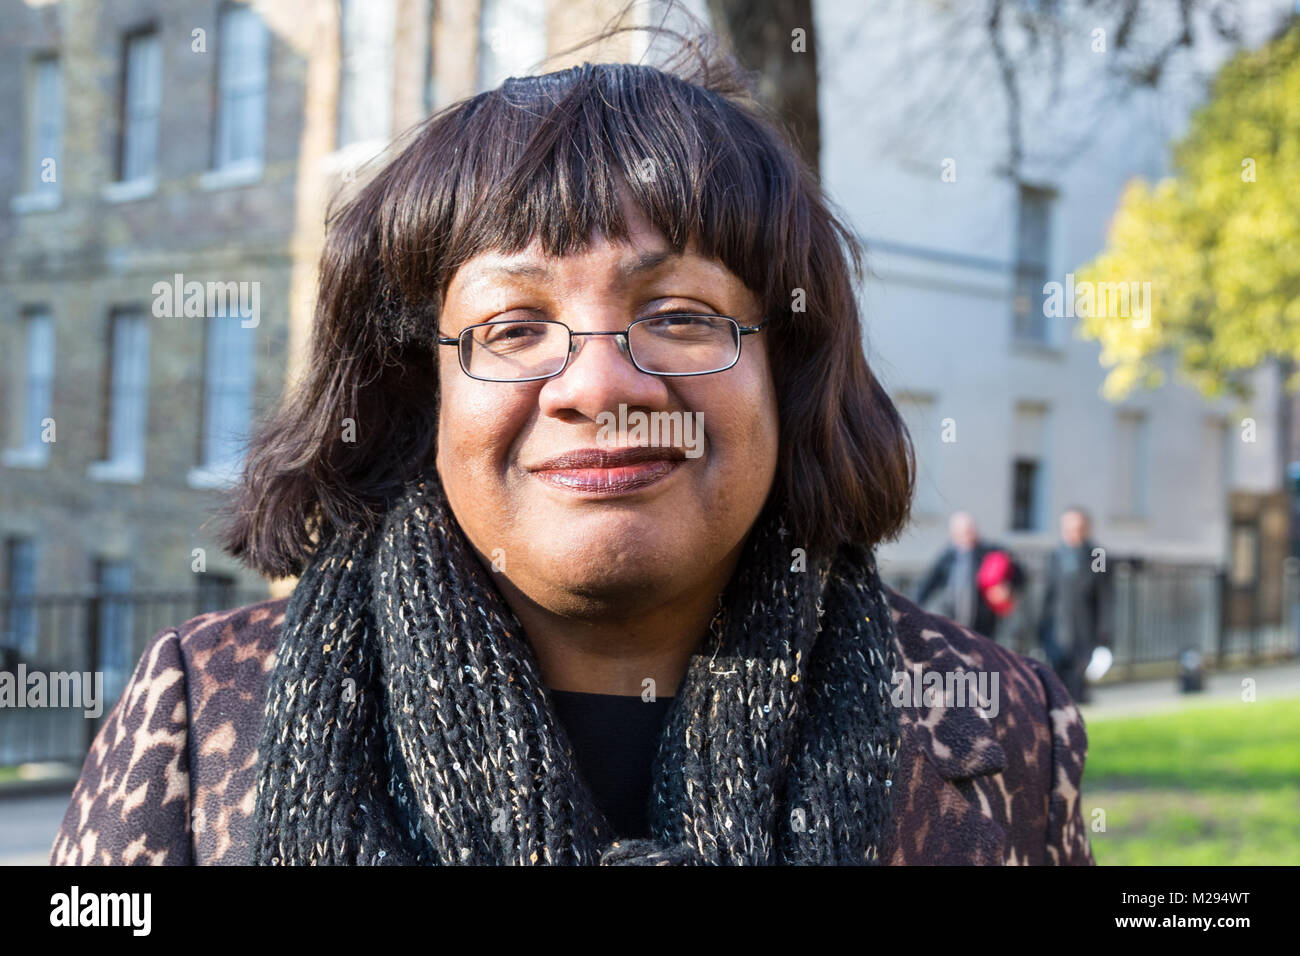 Westminster, London, UK. 6th Feb 2018. Diane Abbott. Labour's female MPs and peers, including, Dame Margaret Beckett, Diane Abbott, Dame Margaret Hodge, Dawn Butler, Angela Eagle and many others celebrate the centenary of women's suffrage and 100 years of women voting in front of the Houses of Parliament. Credit: Imageplotter News and Sports/Alamy Live News Stock Photo